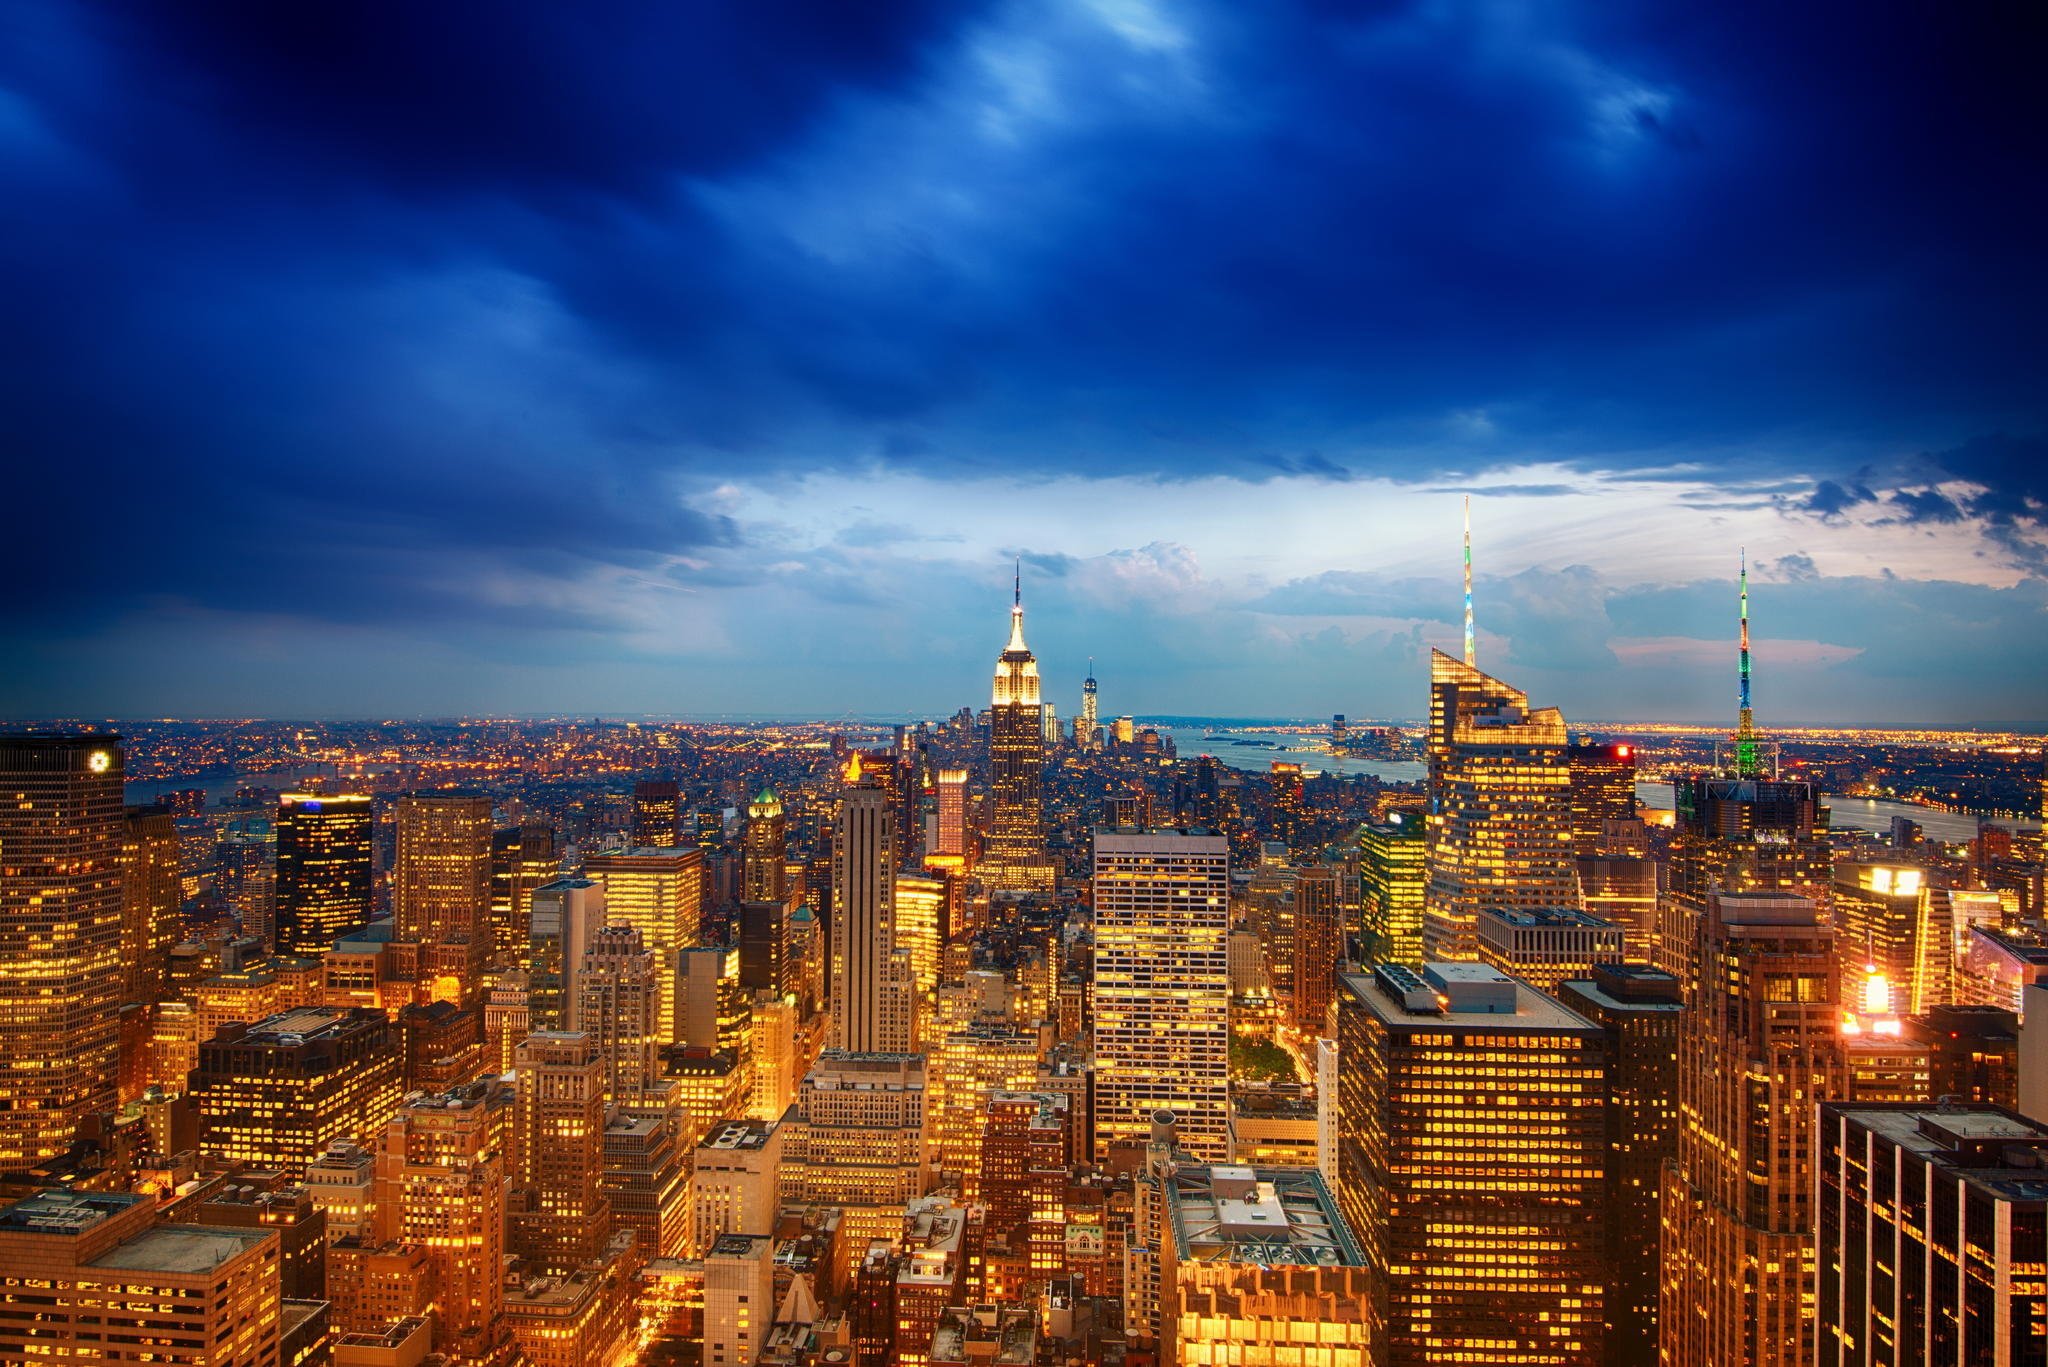 new, York, New, York, City, Nyc, Manhattan, Usa, Empire, State, Building, Evening, Sunset, Sky, Clouds, Buildings, Skyscrapers, Lights, Landscape, City Wallpaper